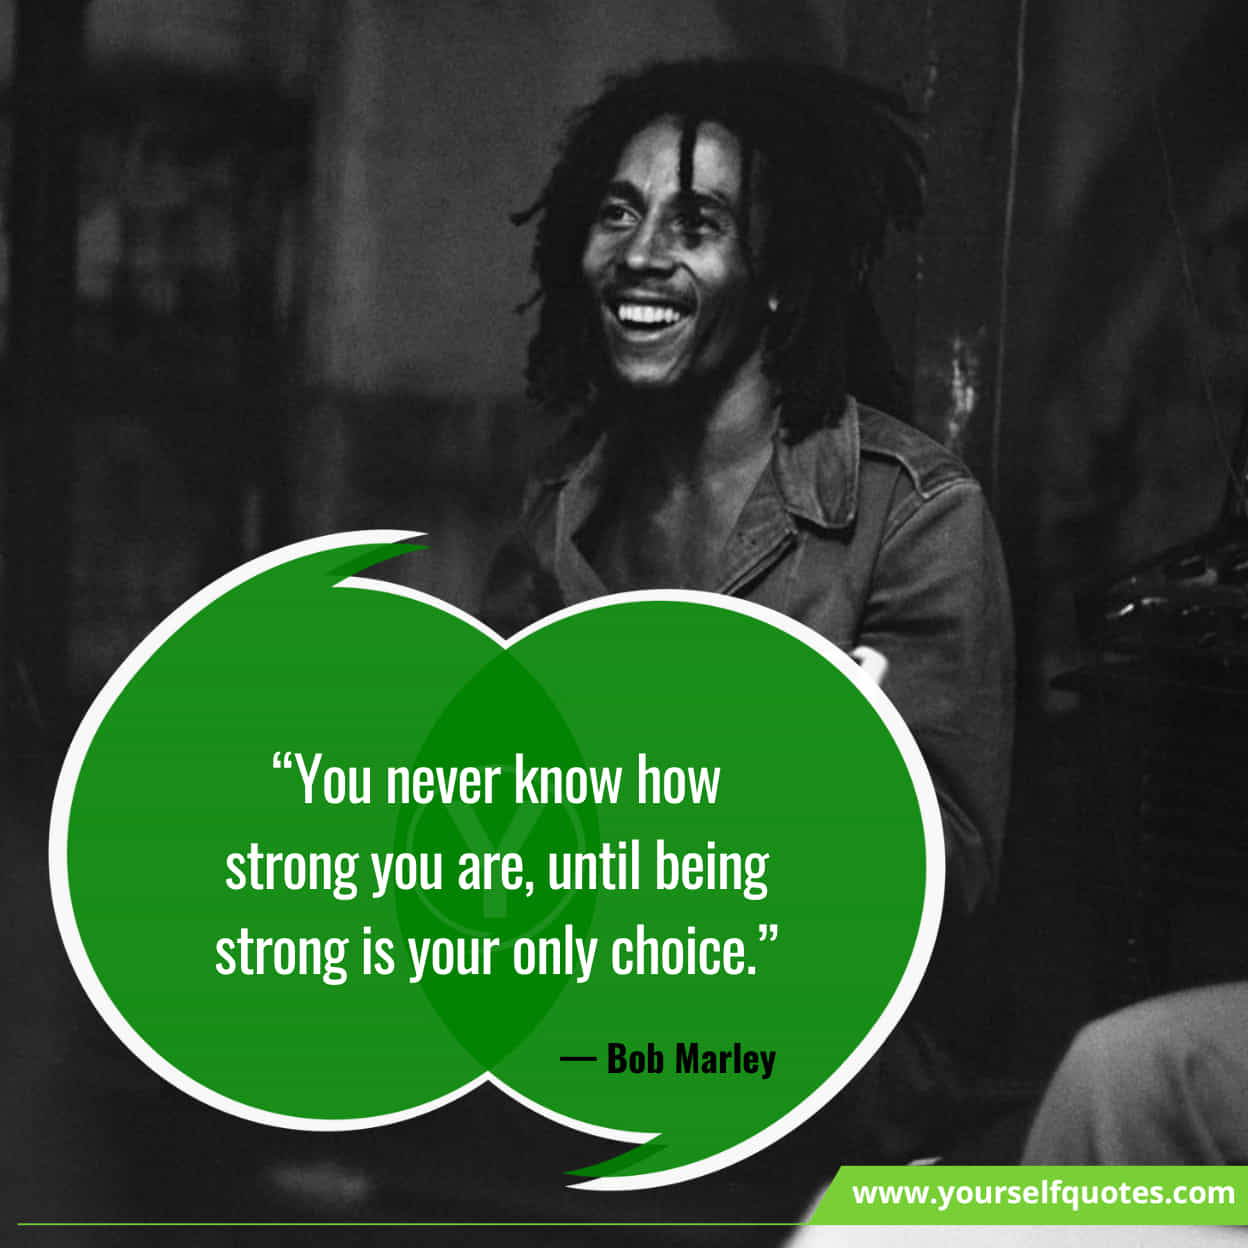 87 Bob Marley Quotes That Will Force Your Mind To Sing 2022 